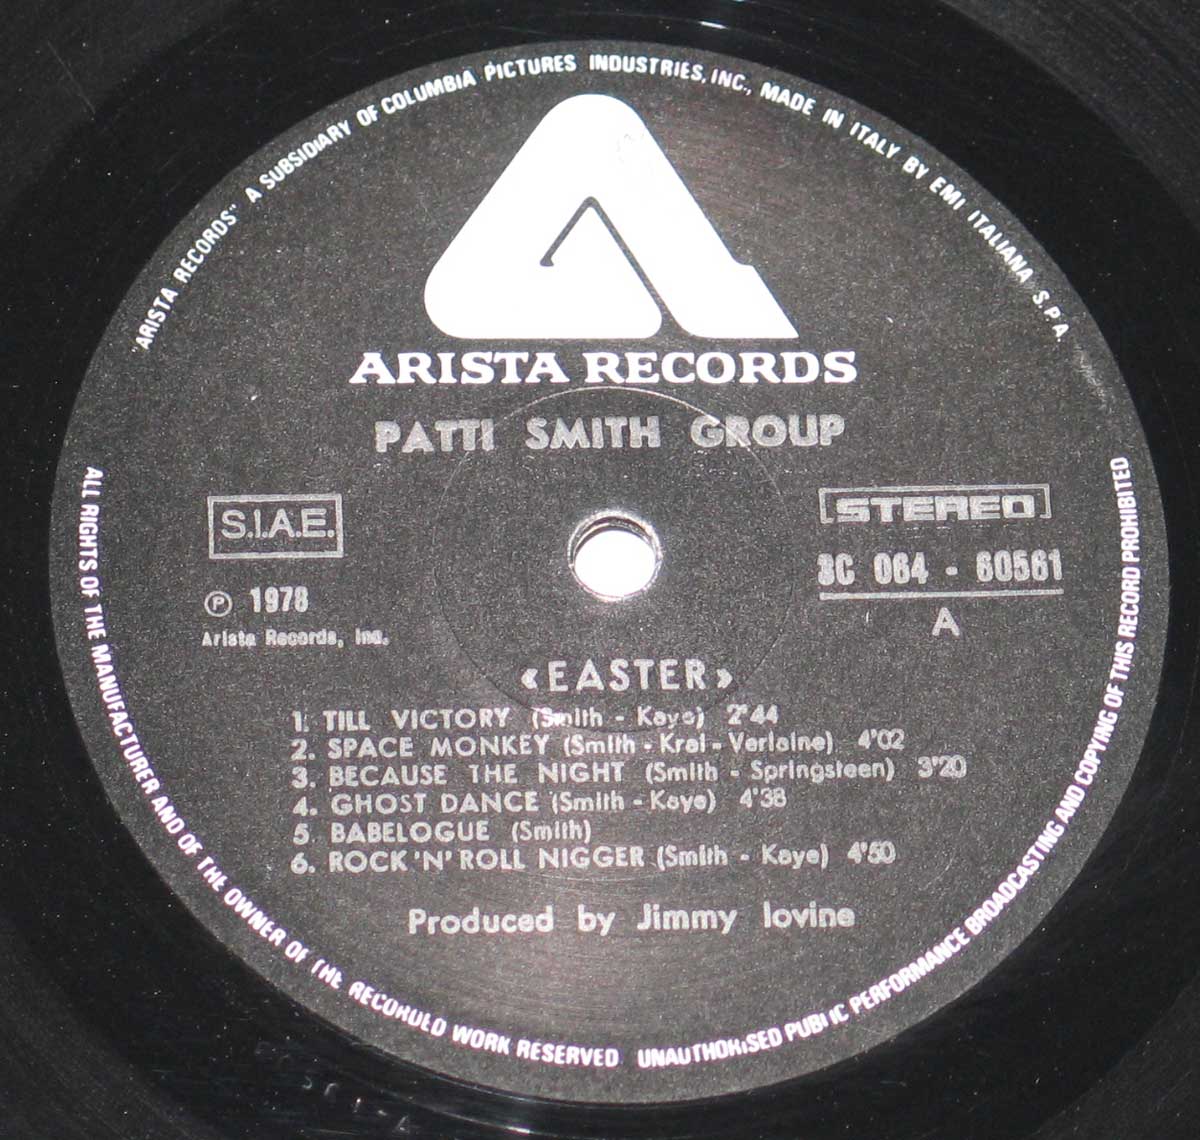 Close-up photo of the Italian release of the Black and White Arista record label  